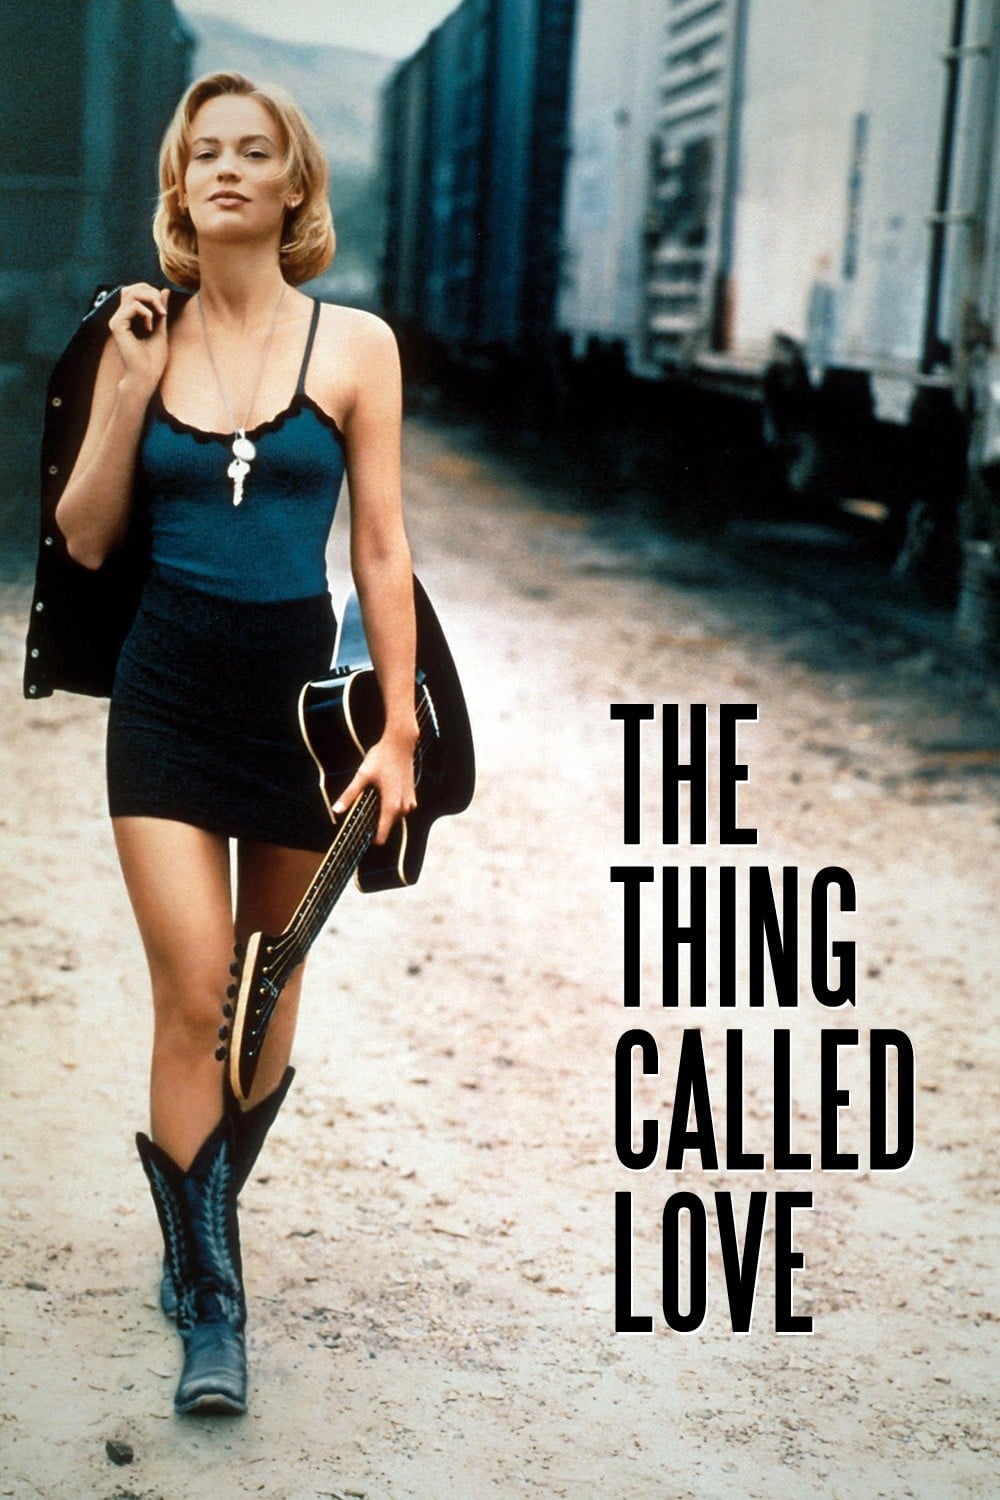 Poster for the movie "The Thing Called Love"